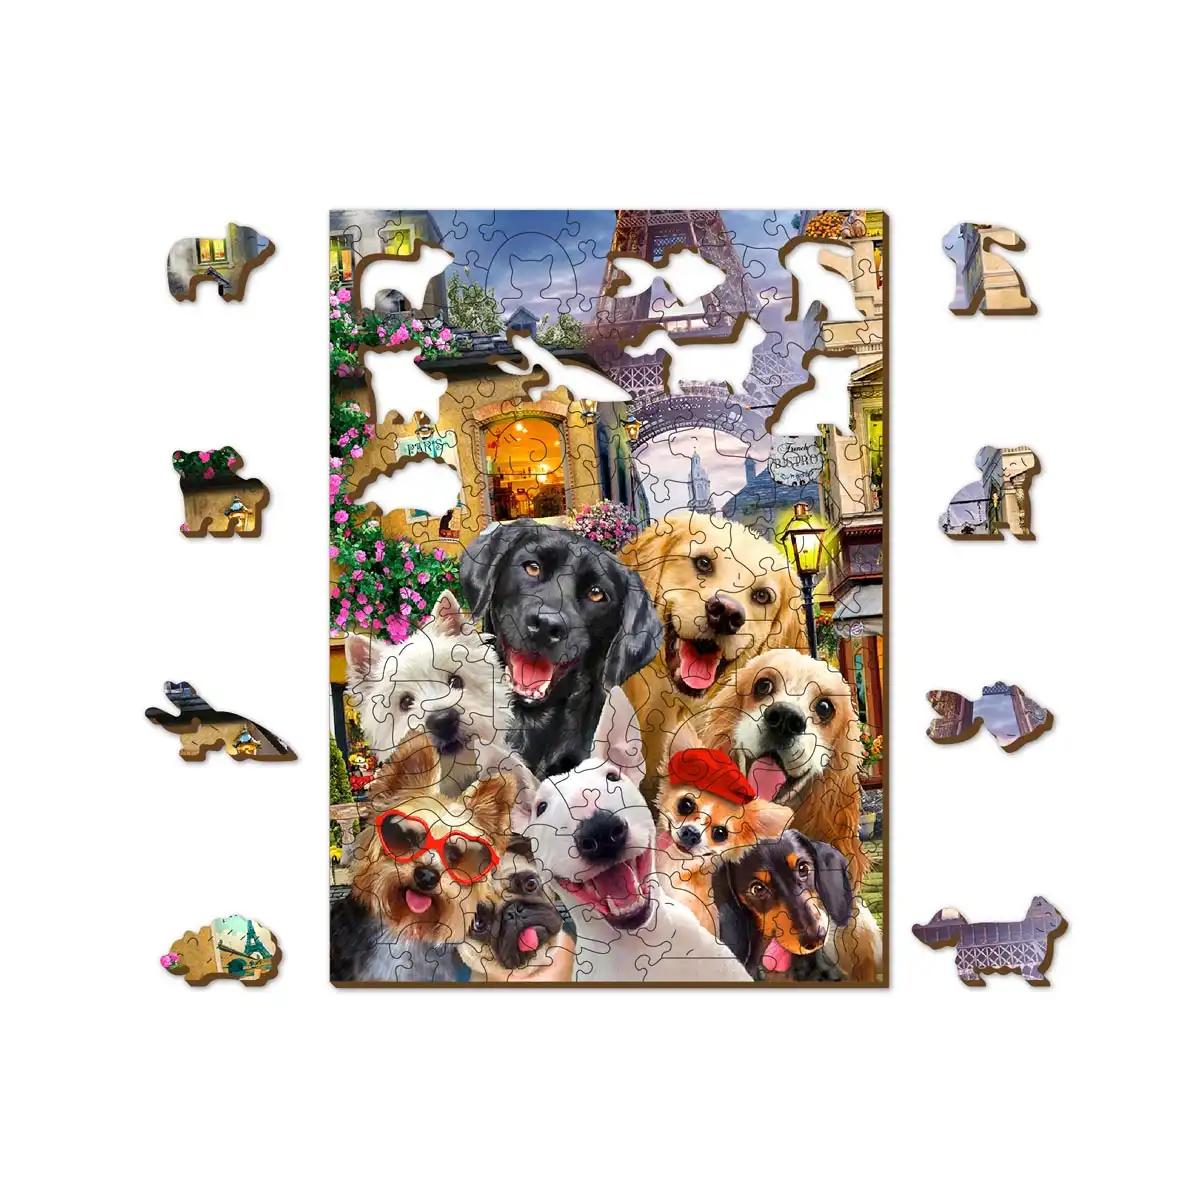 Corgi Dog Wooden Jigsaw Puzzle 1000 Piece Surprise for Family Home Decor  Art Puzzle,Unique Birthday Present Suitable for Teenagers and Adults for